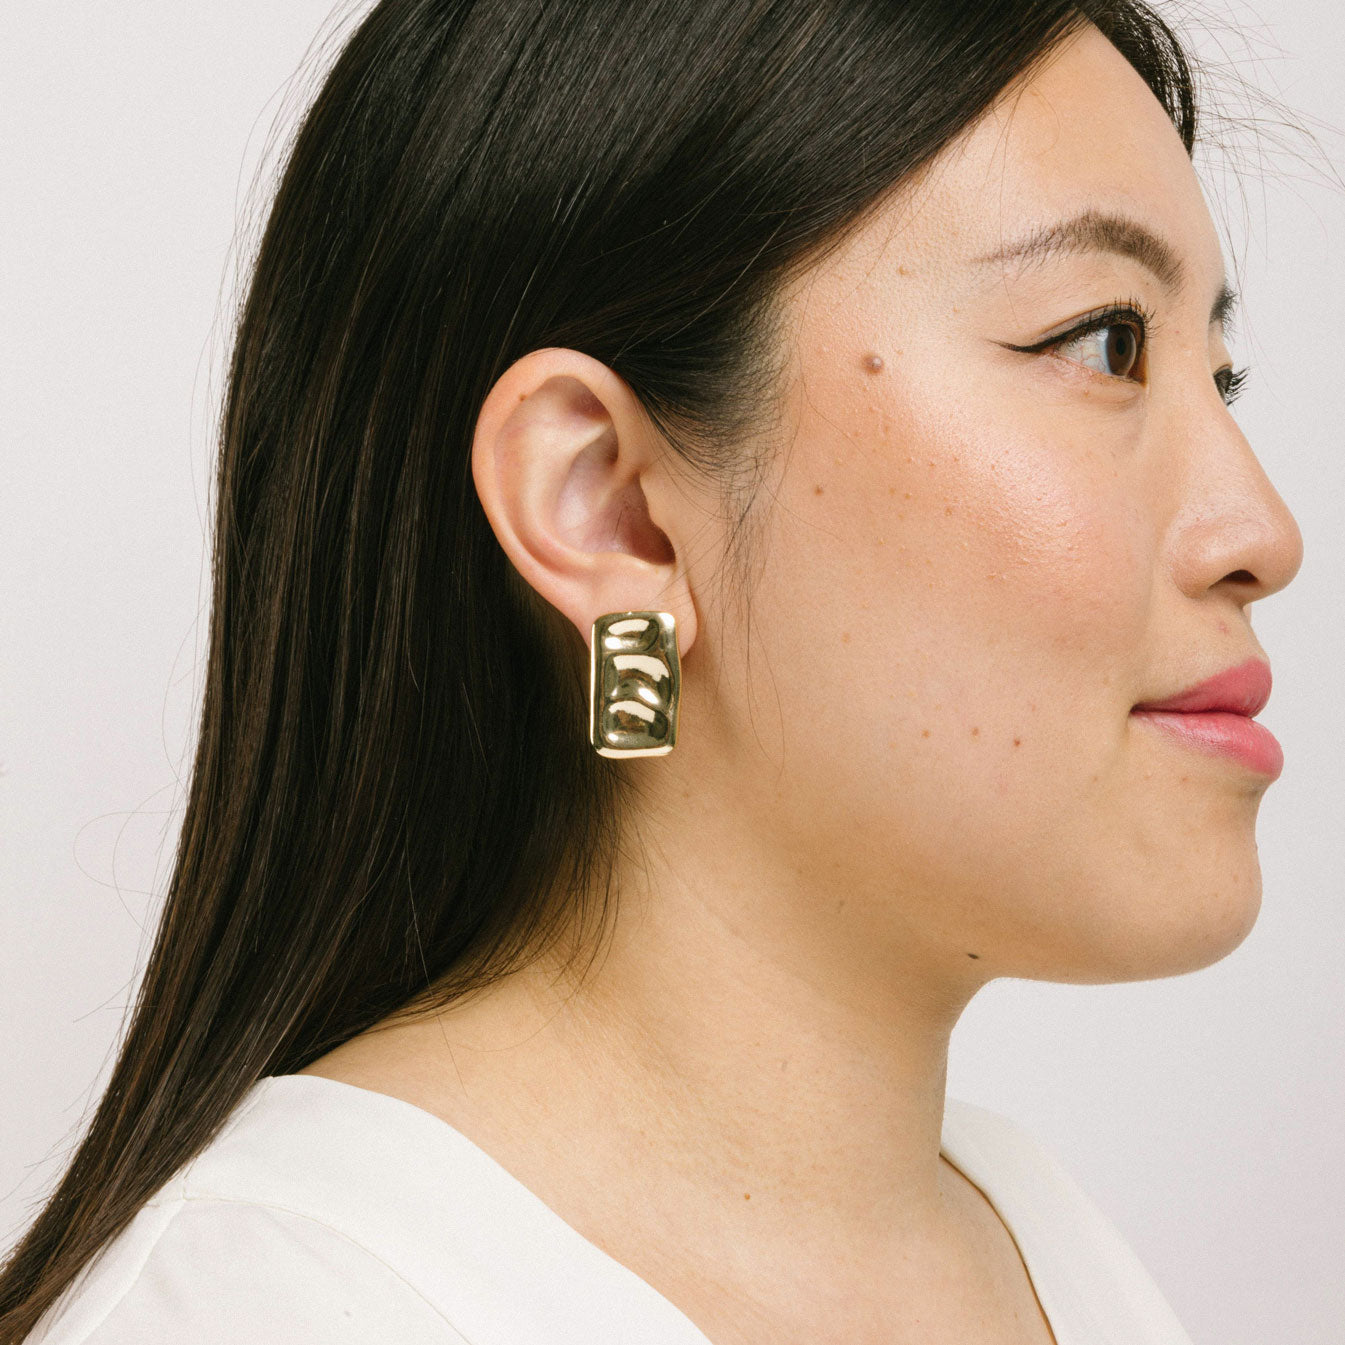 A model wearing the Nova Clip On Earrings in Gold feature a secure and comfortable padded clip-on design, suitable for all ear types. The earrings are crafted with Gold Tone Copper Alloy and offer an average comfortable wear duration of 8-12 hours. The design of the earring does not allow for adjustment, and each item sold is a single pair.